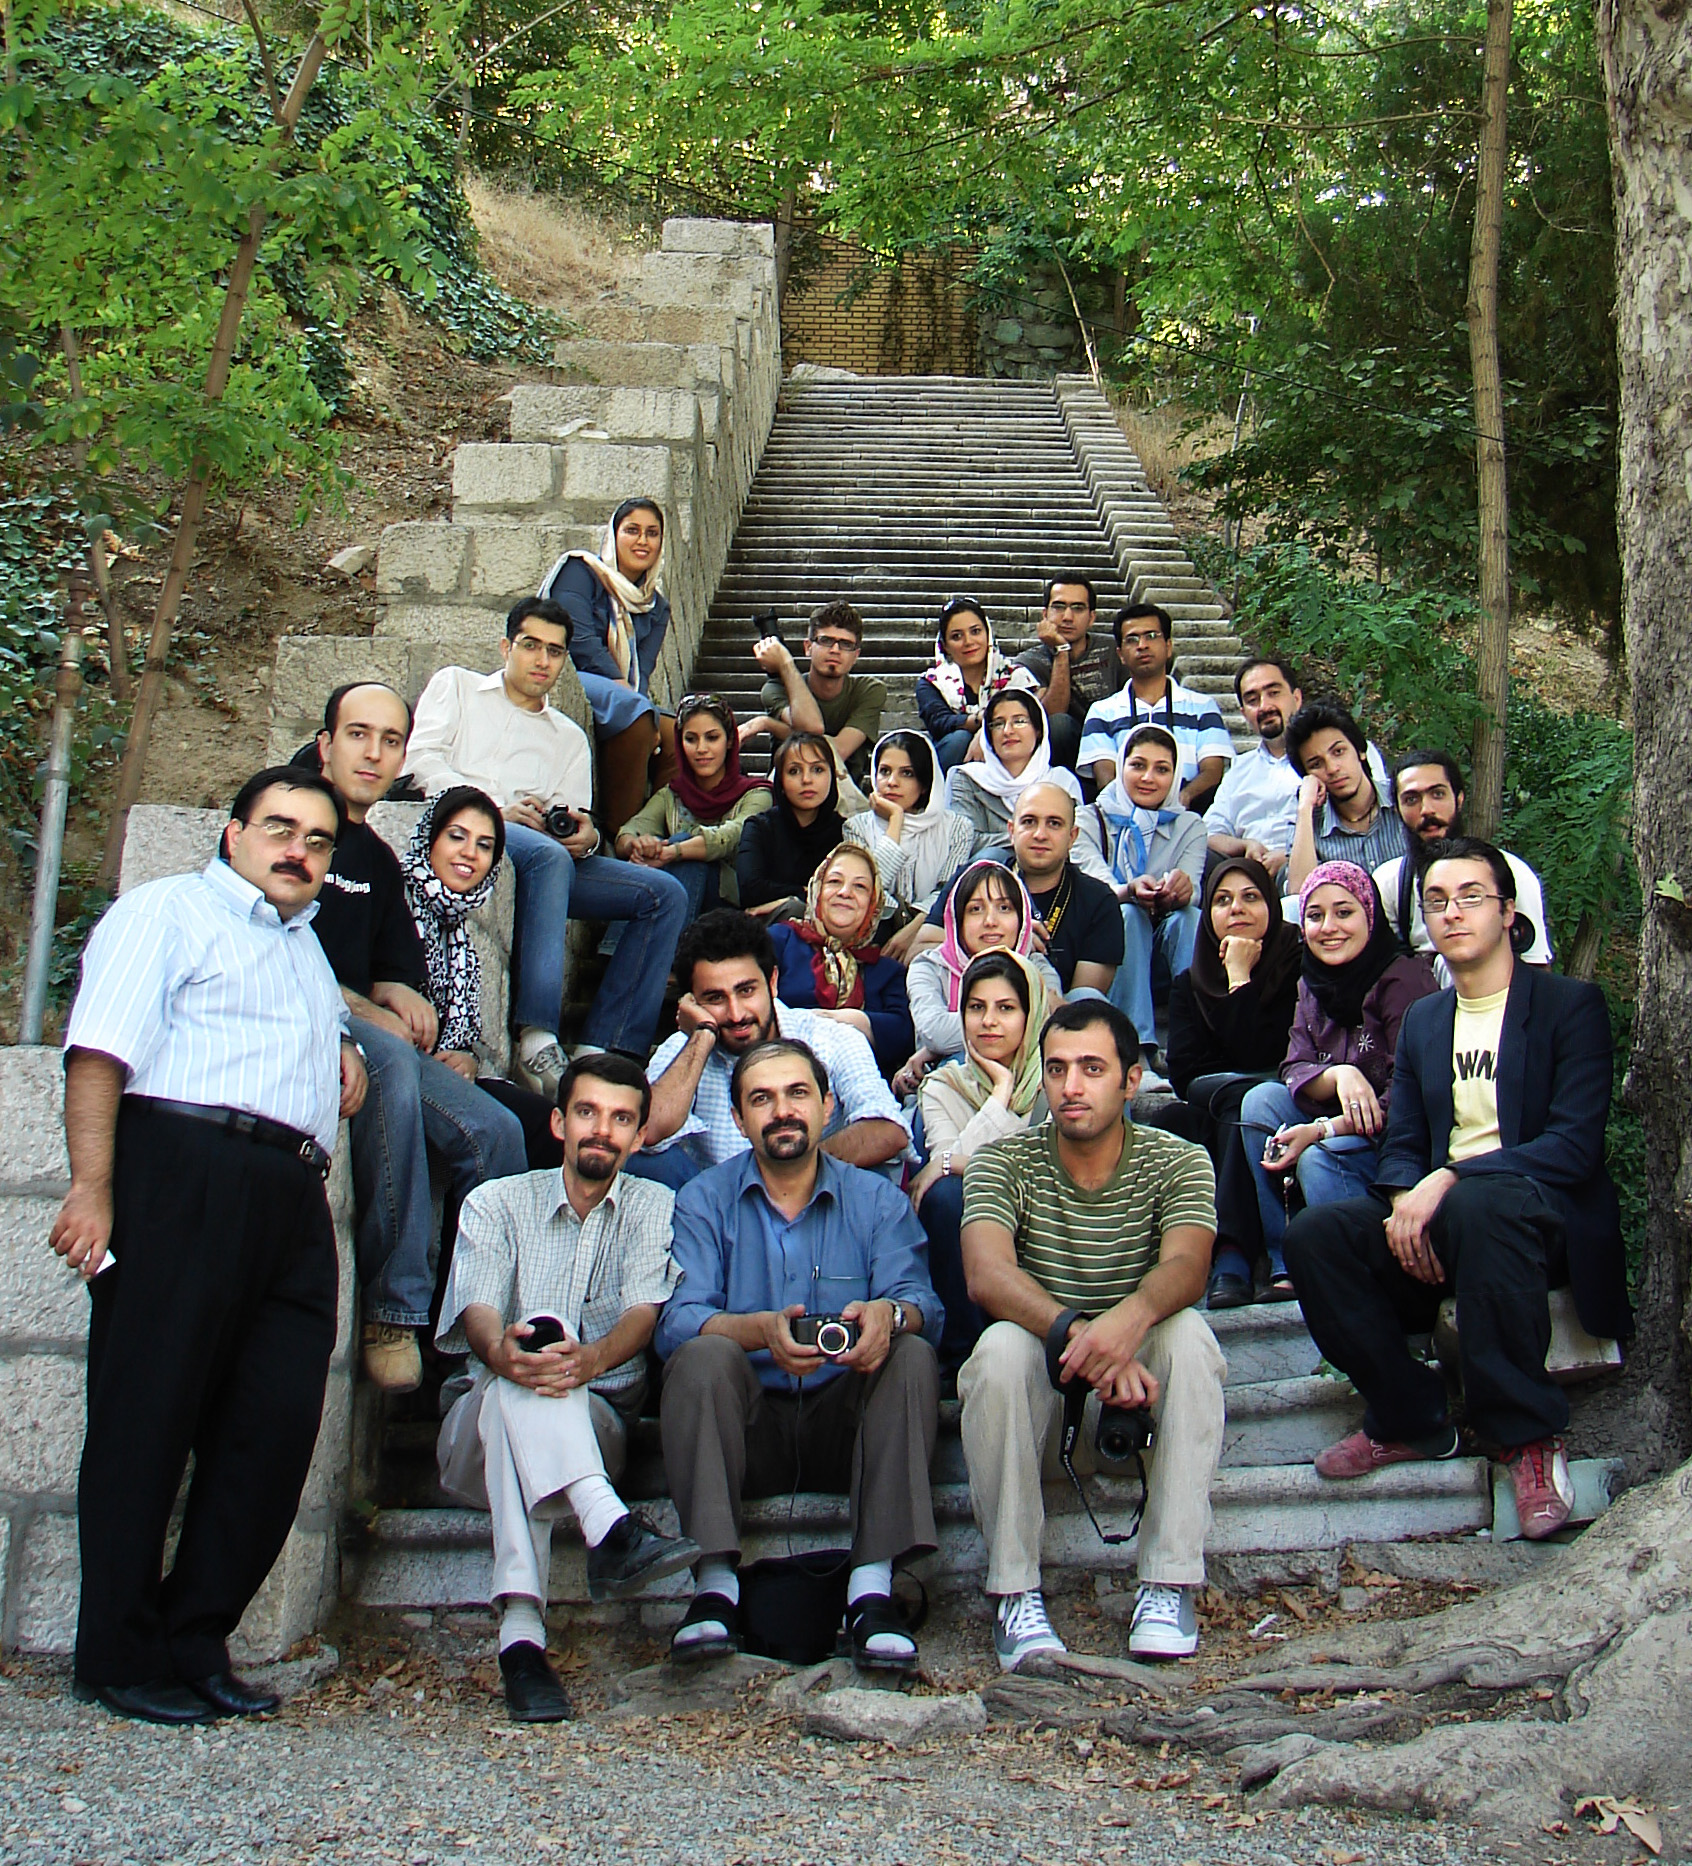 a group of people pose for a po on steps in the forest